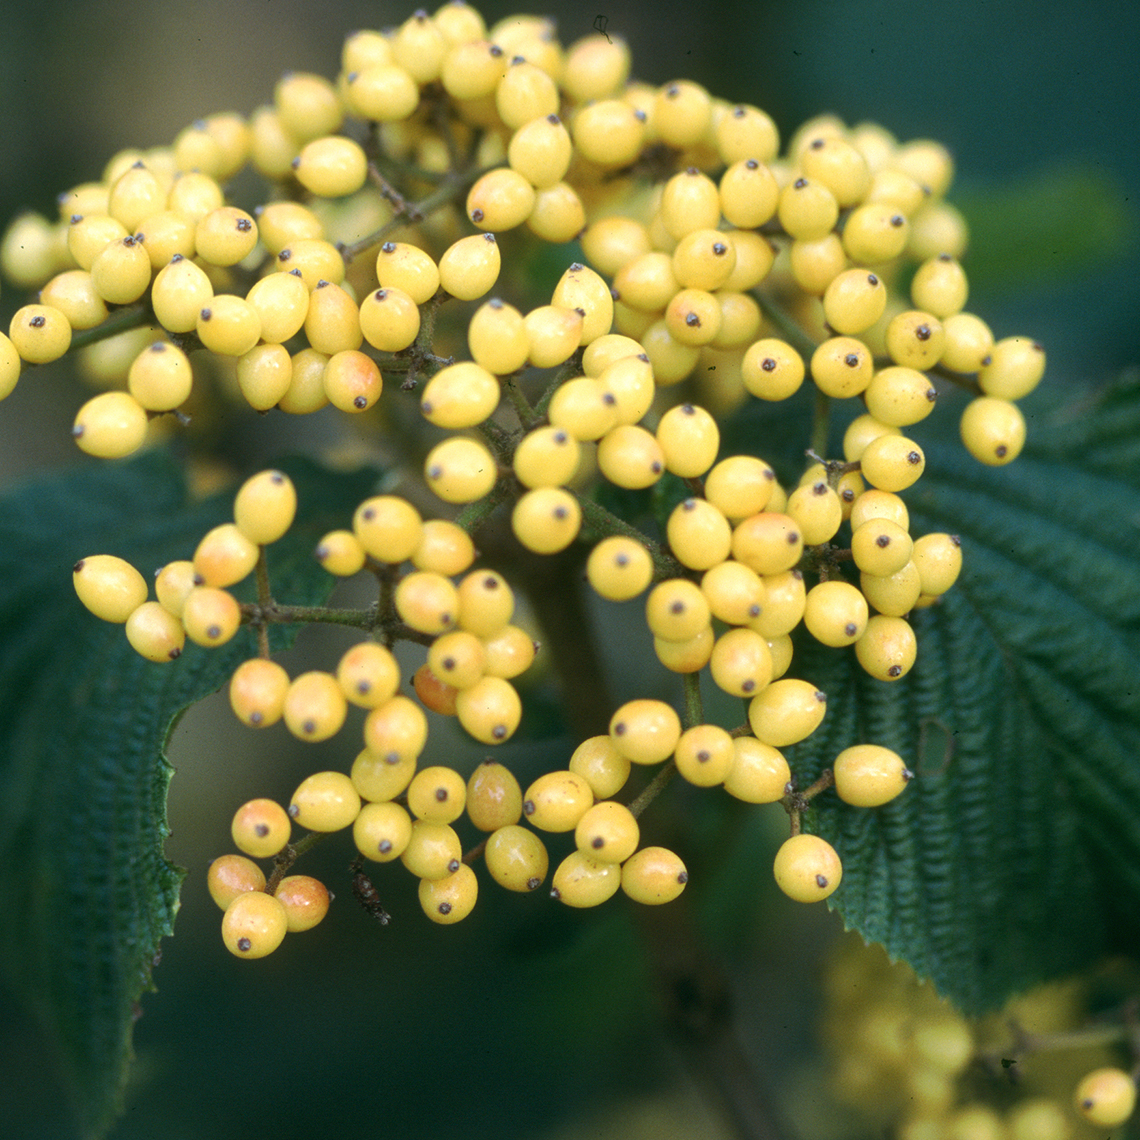 The lovely yellow berries of Michael Dodge viburnum shown in closeup view